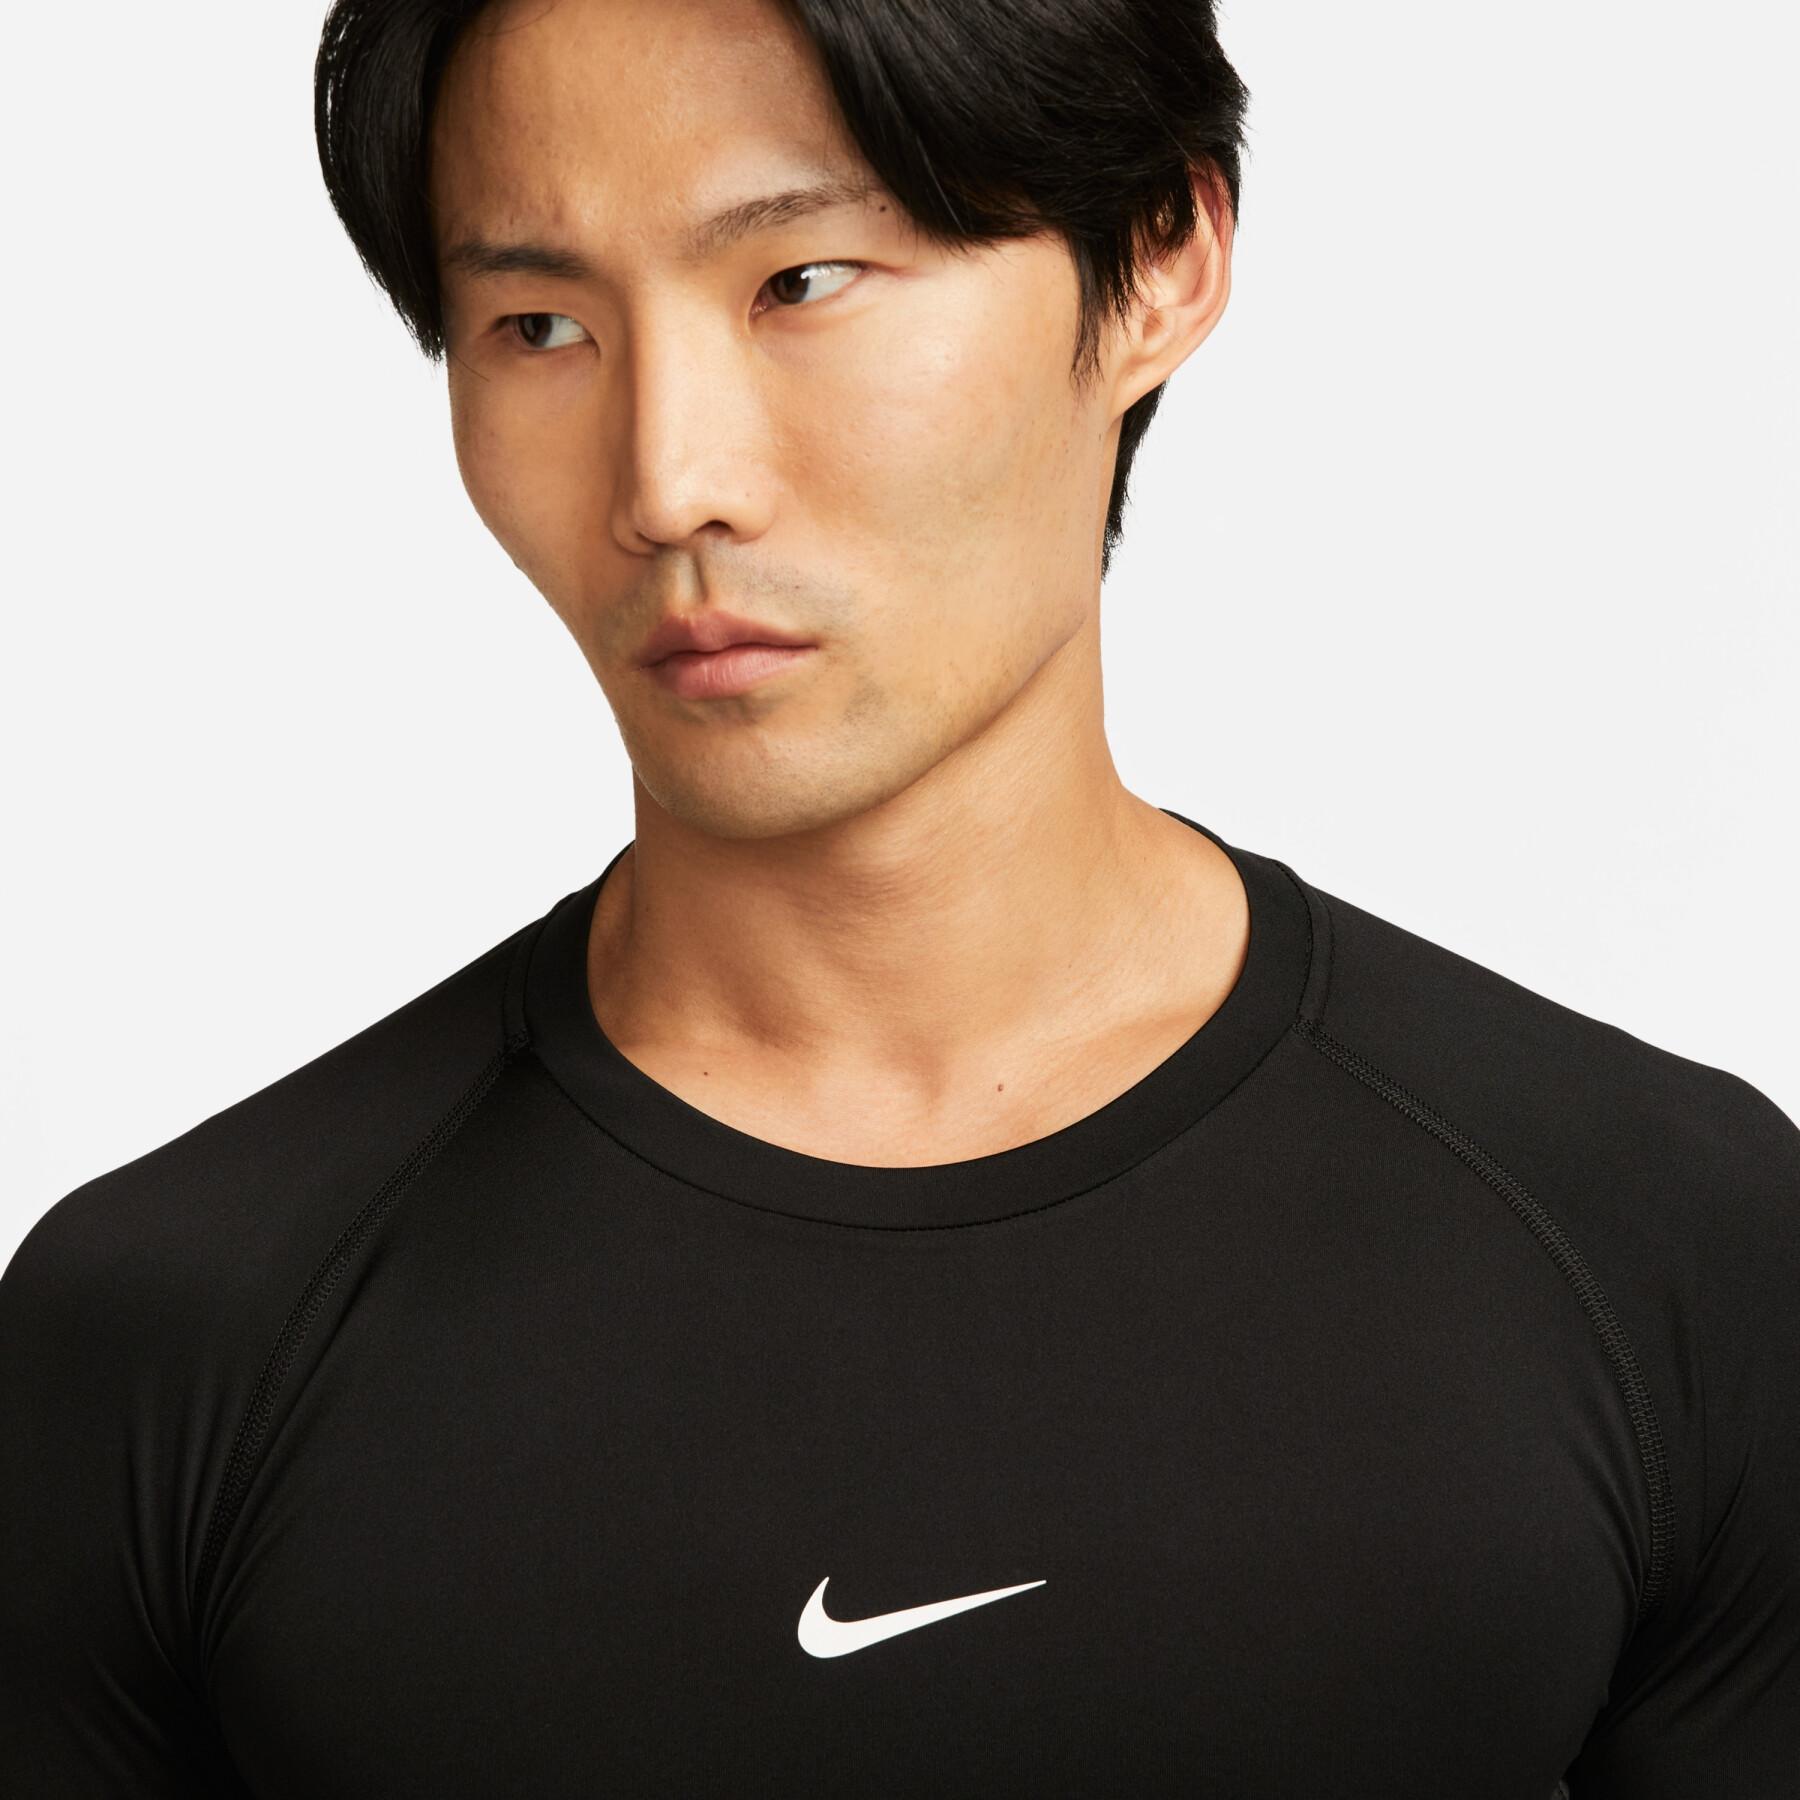 Long-sleeved tight-fitting jersey Nike Pro Dri-FIT